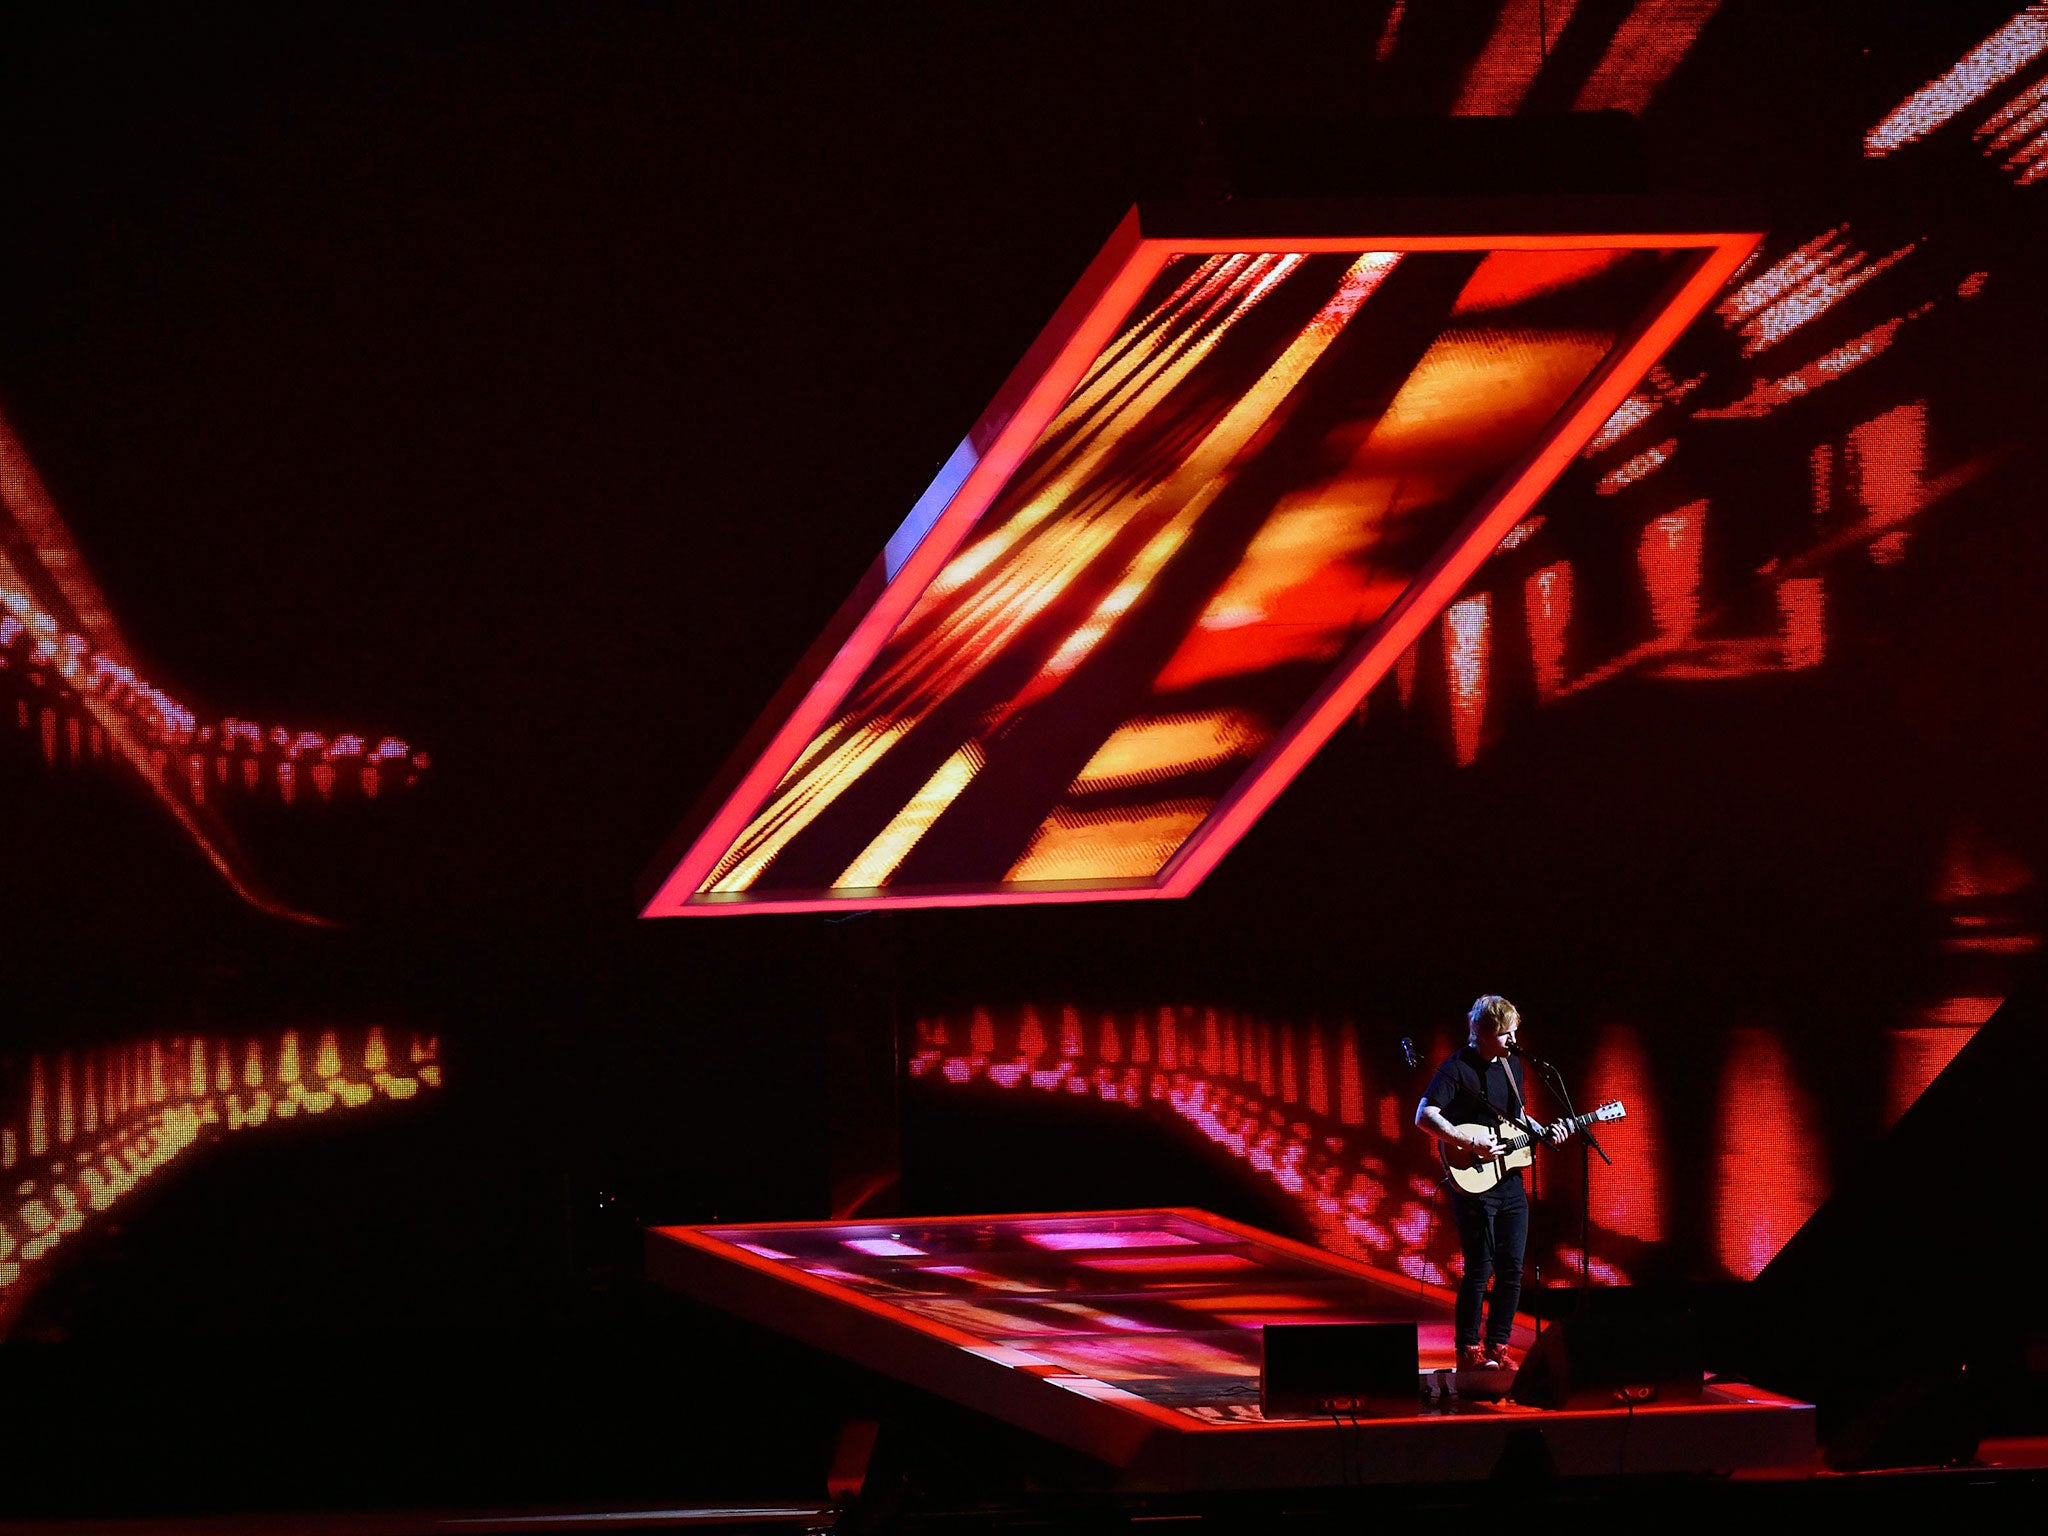 Ed Sheeran performs during the BRIT music awards at the O2 Arena in Greenwich, London